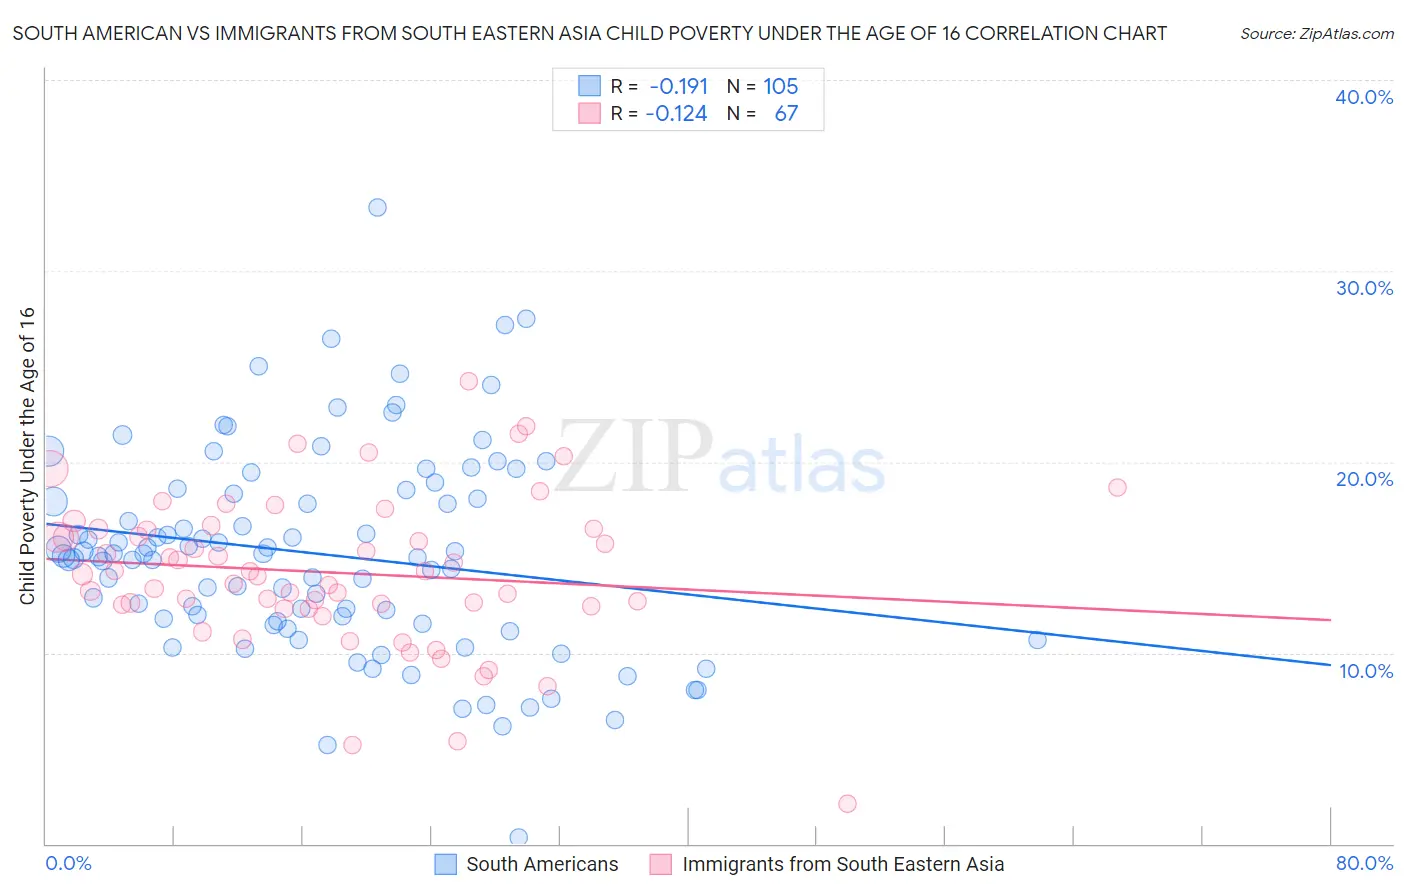 South American vs Immigrants from South Eastern Asia Child Poverty Under the Age of 16